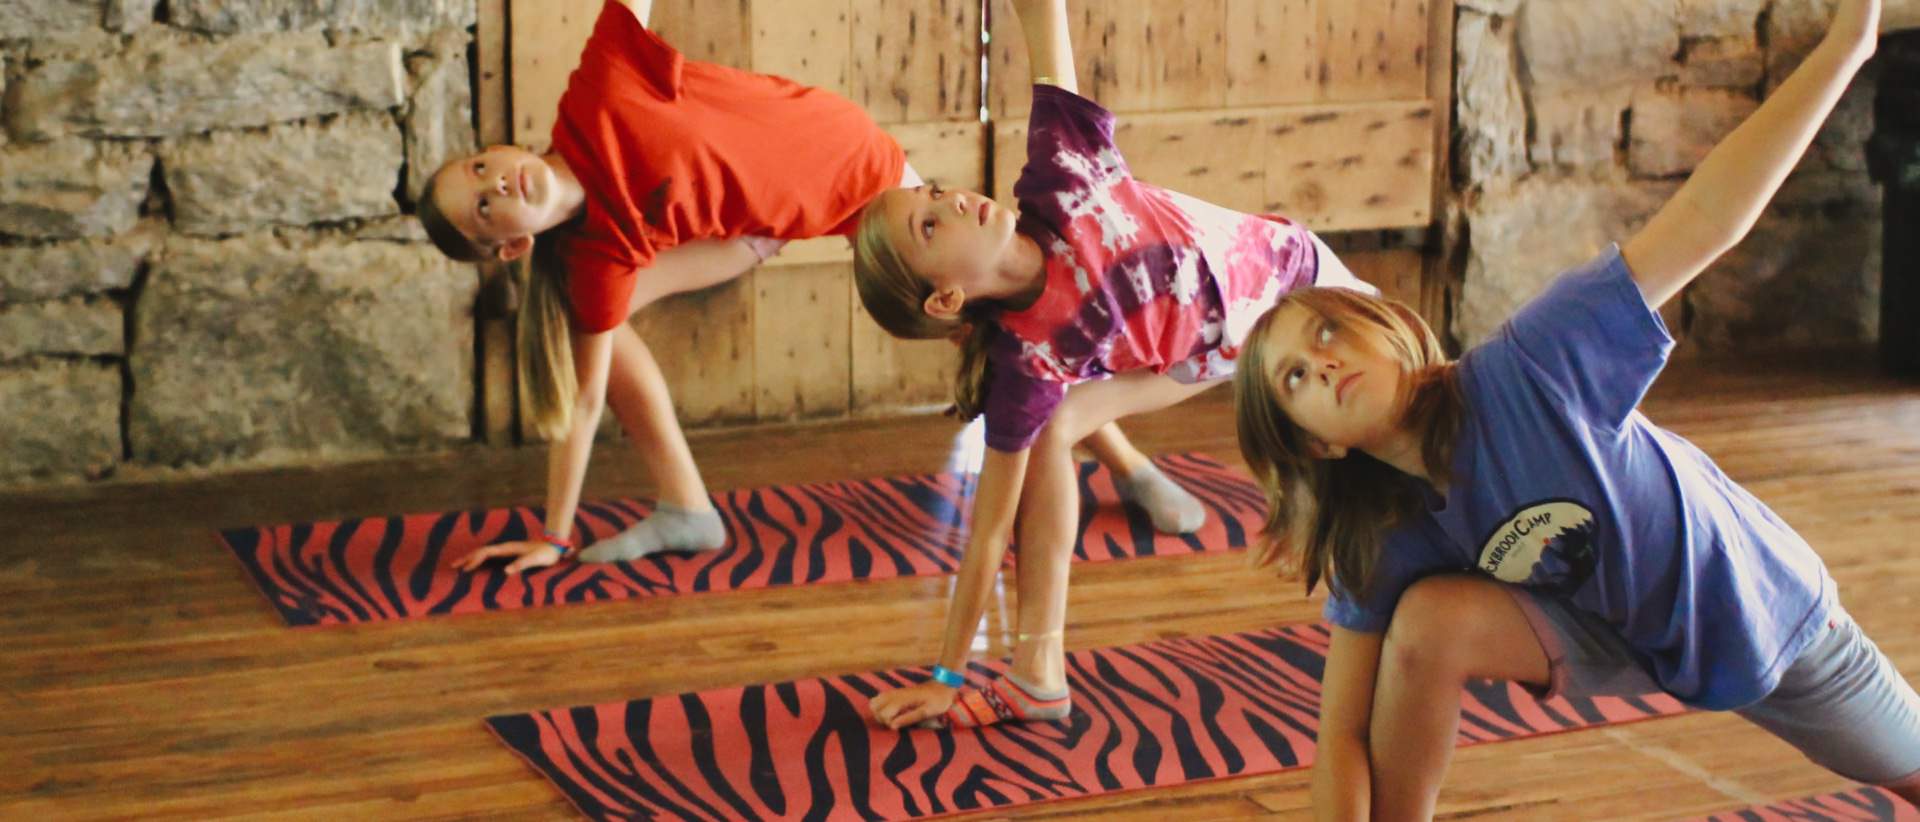 5 Fun Ways To Engage Your Kids In Yoga Practice - DoYou